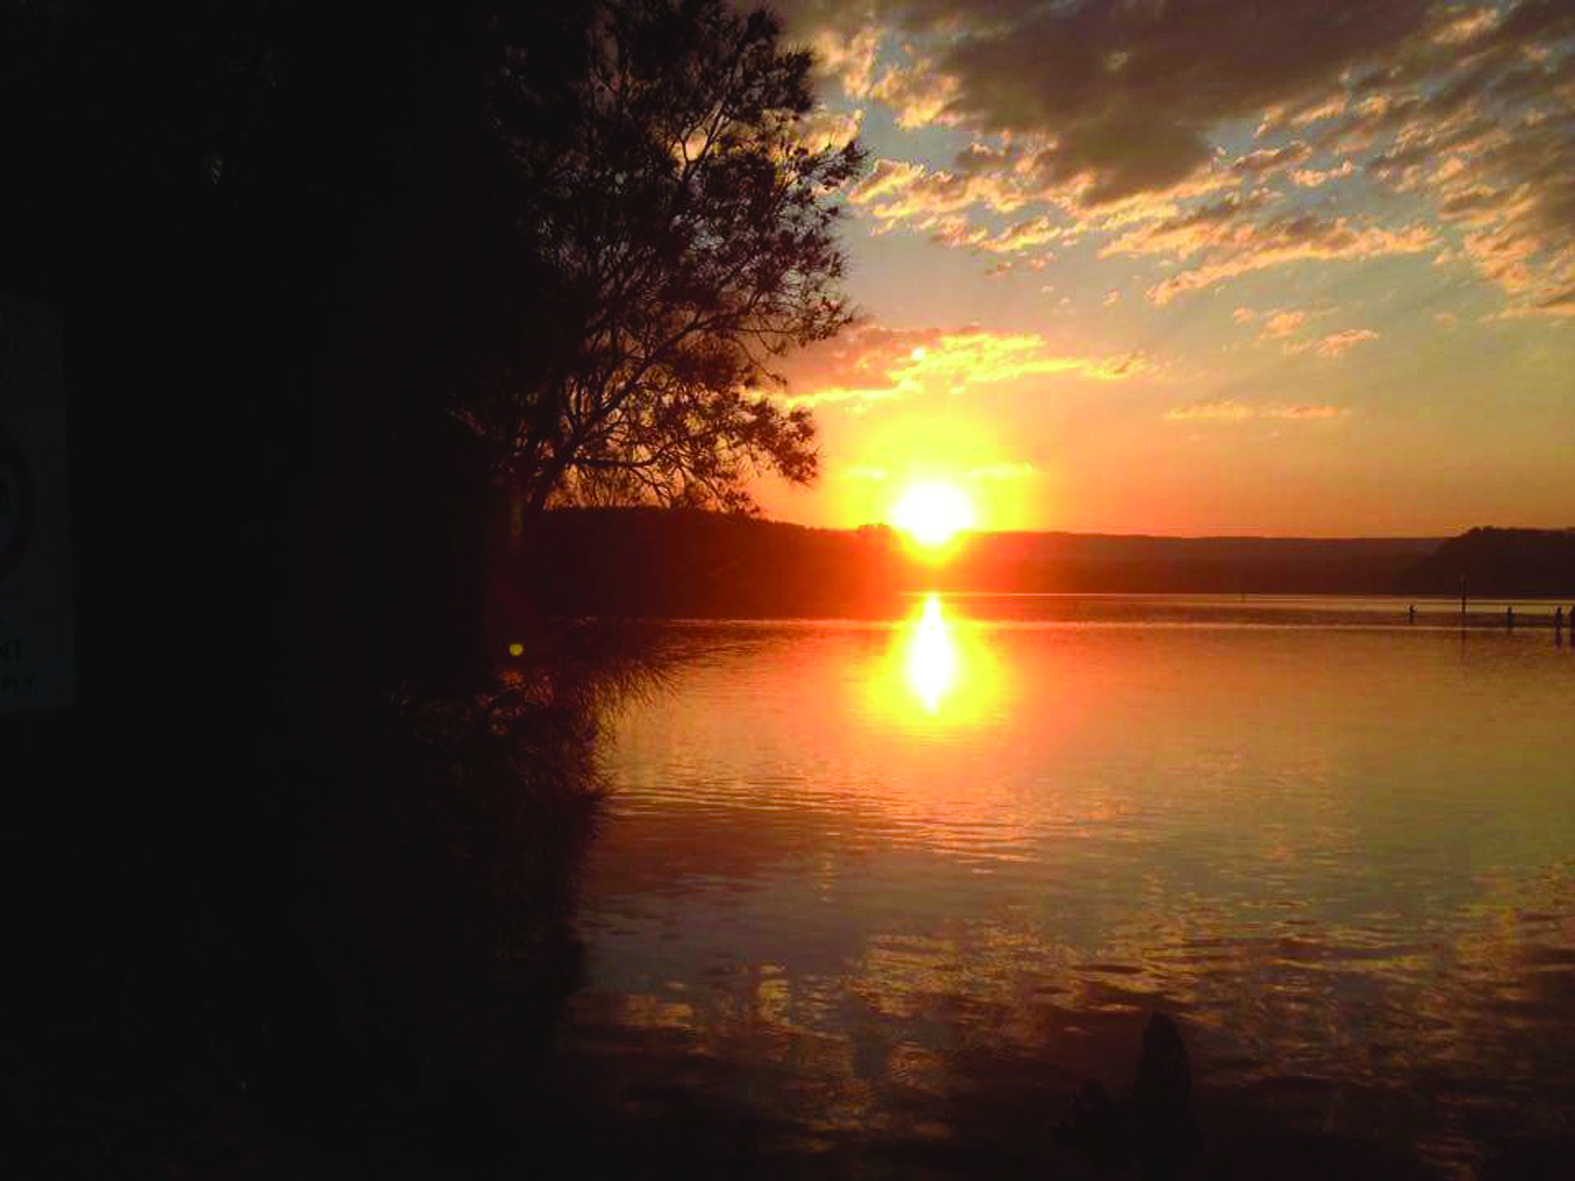 A beautiful sunset over the lake.